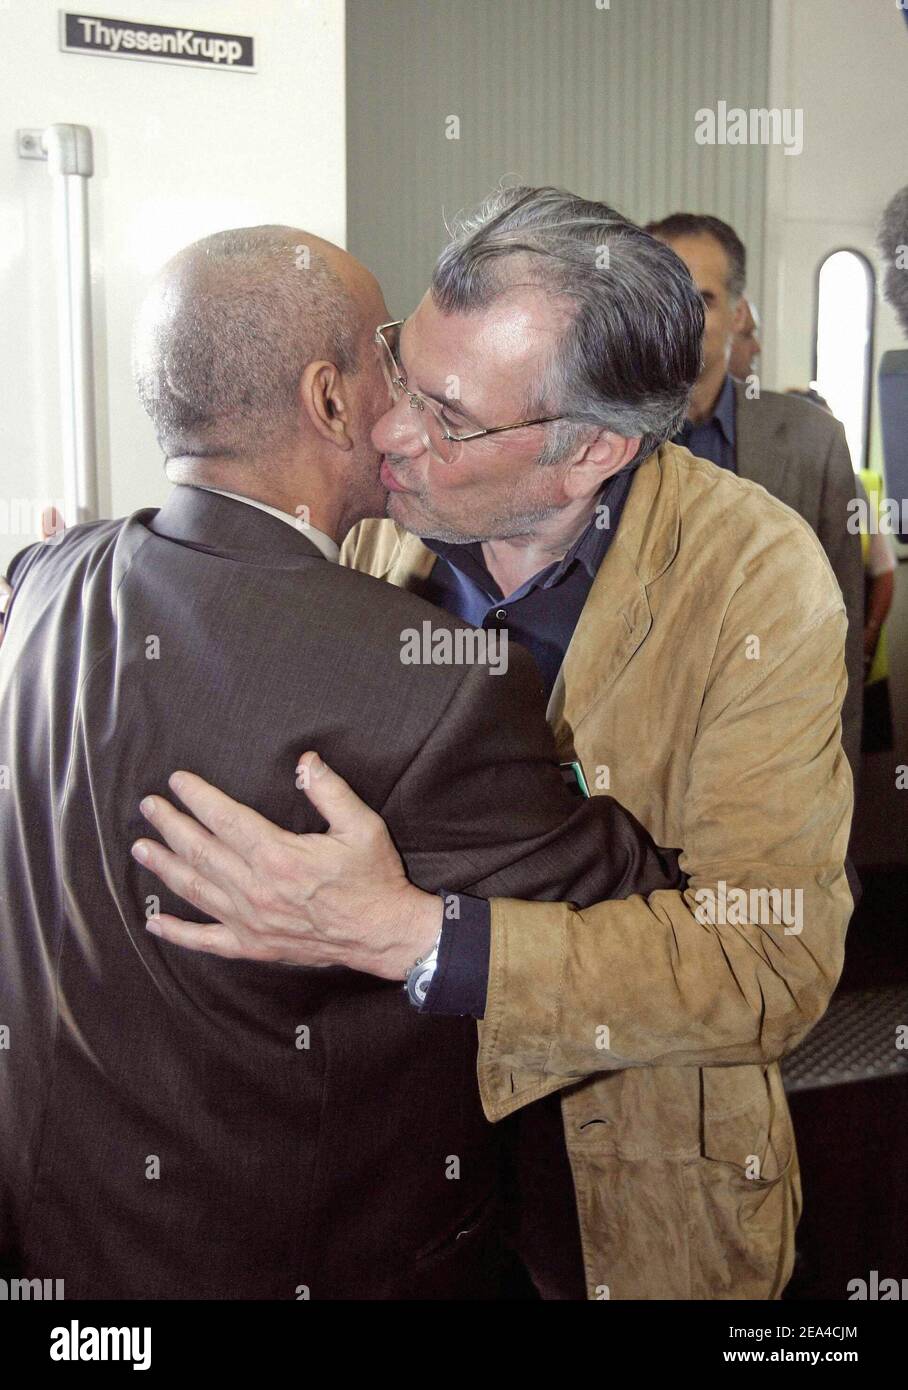 Iraqi interpreter Hussein Hanoun is greeted by French daily Liberation director Serge July as he arrives at the airport of Orly, near Paris, 16 June 2005. Hanun and Aubenas were free on June 12, 2005 after five-month hostage ordeal in Iraq. Photo Pool by Jack Guez/ABACA. Stock Photo